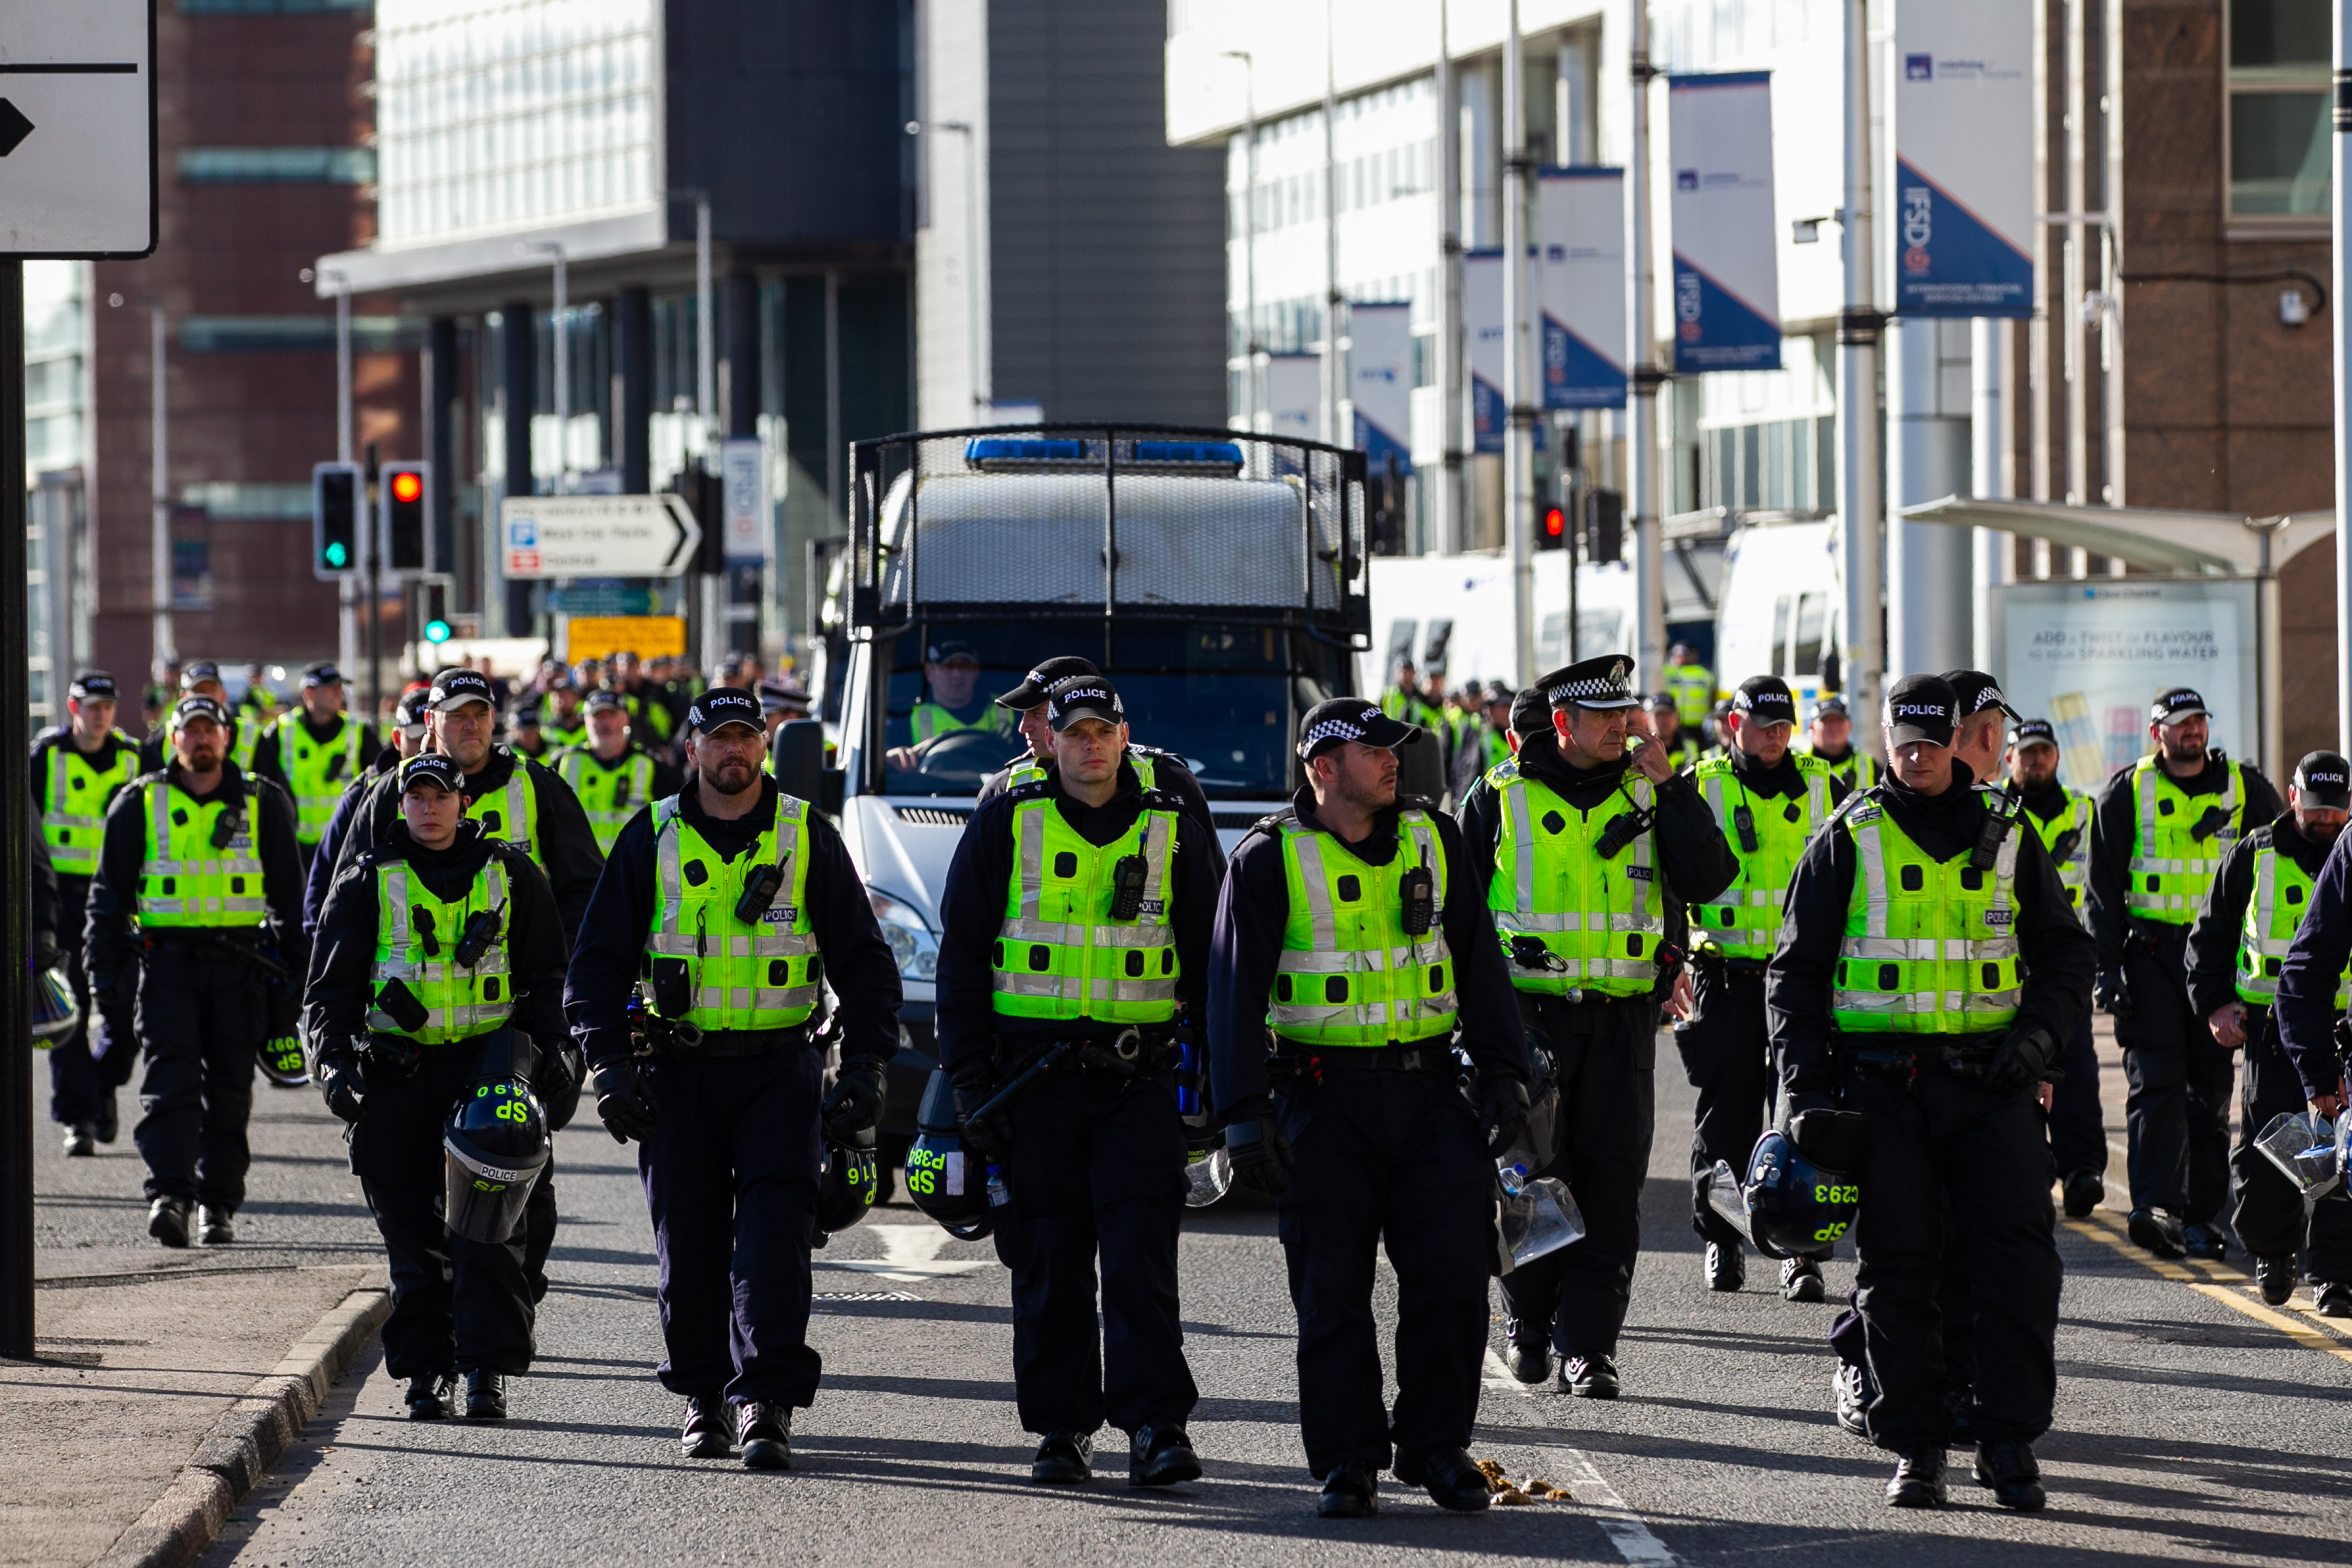 Police on duty at a march on Saturday